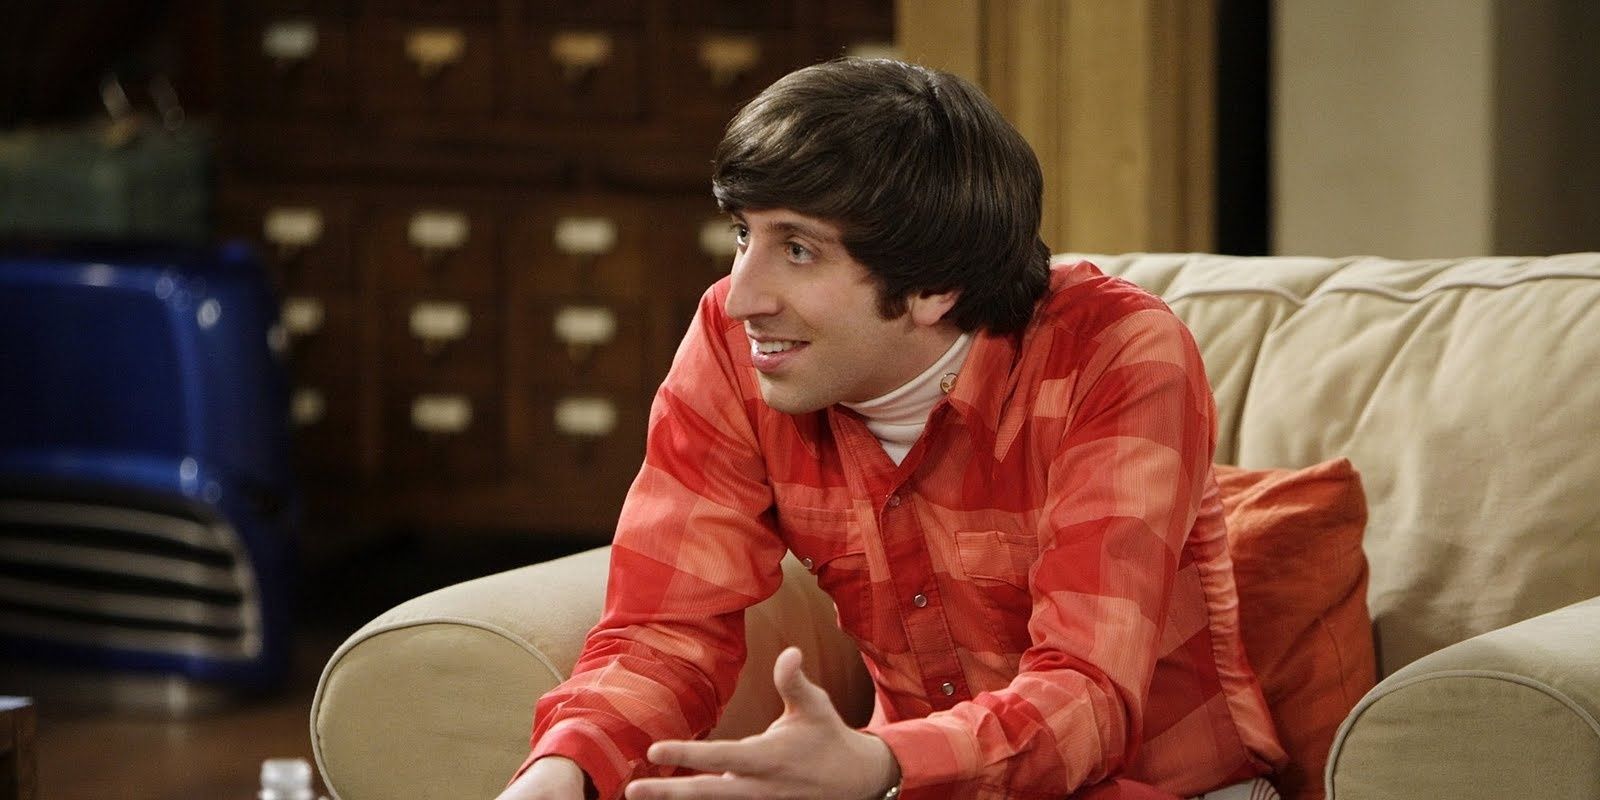 Big Bang Theory Star Speaks On The Downside Of Starring In The Hit Show